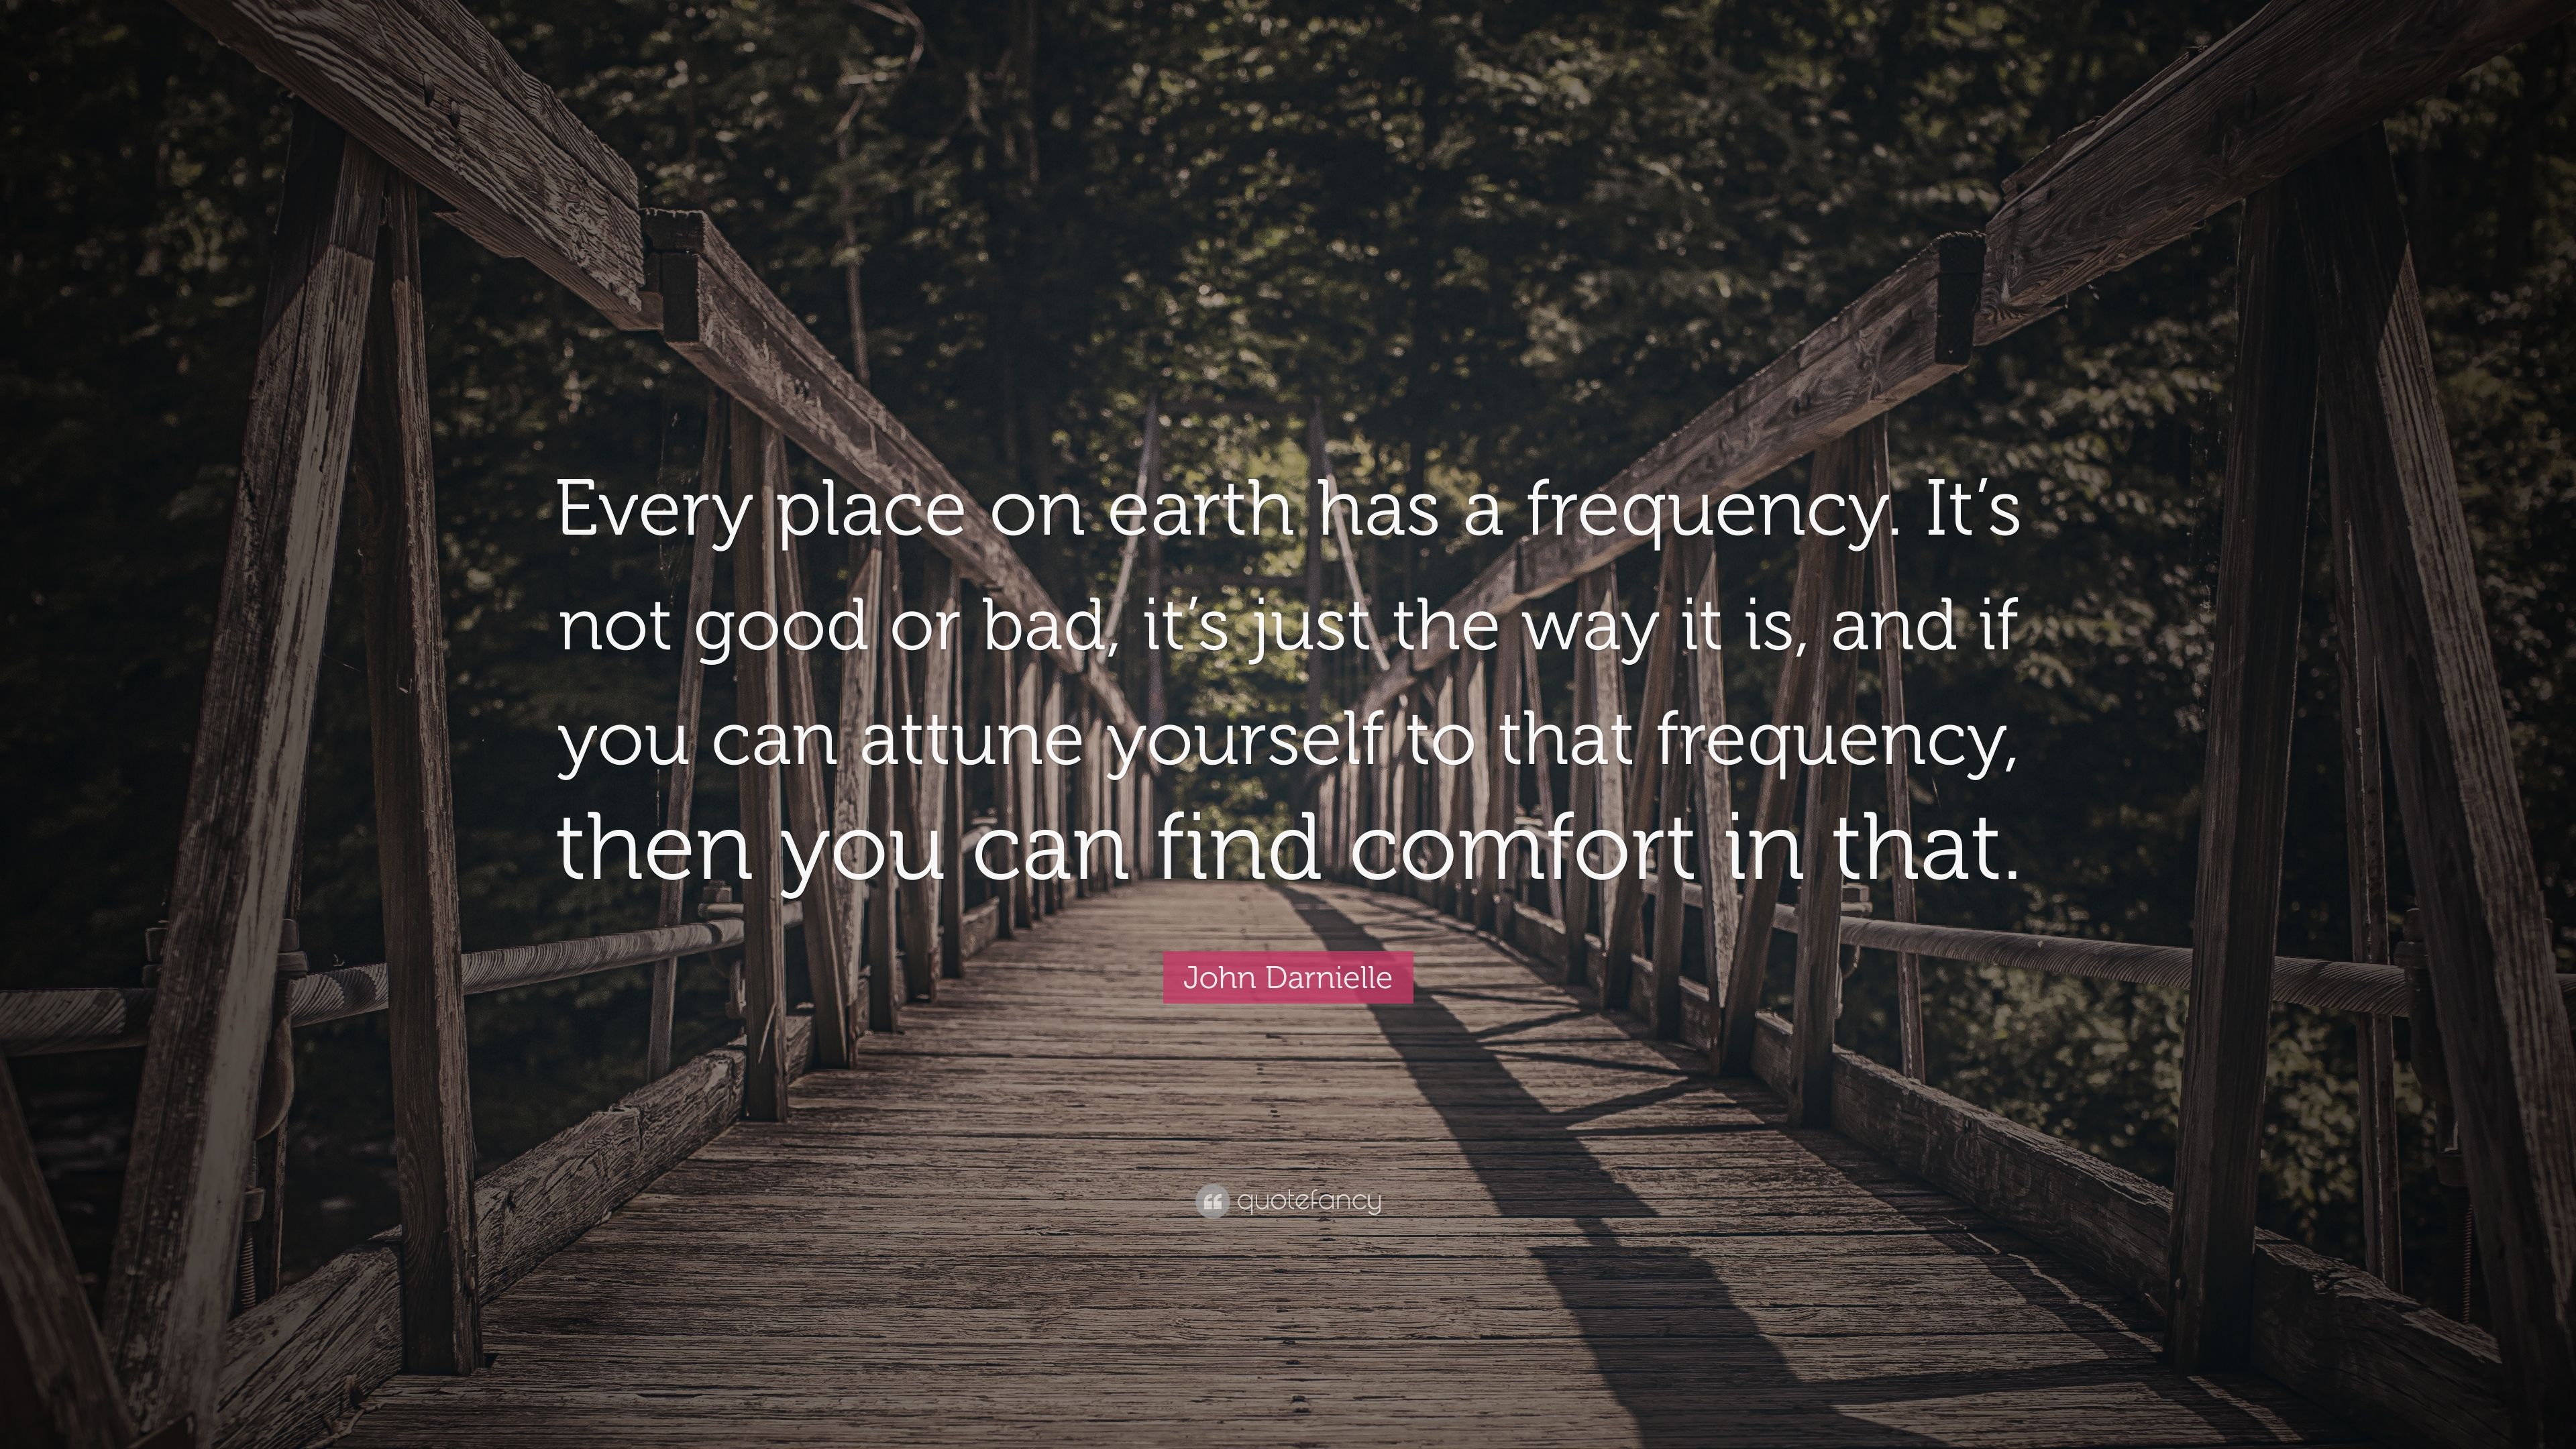 John Darnielle Quote: “Every place on earth has a frequency. It's